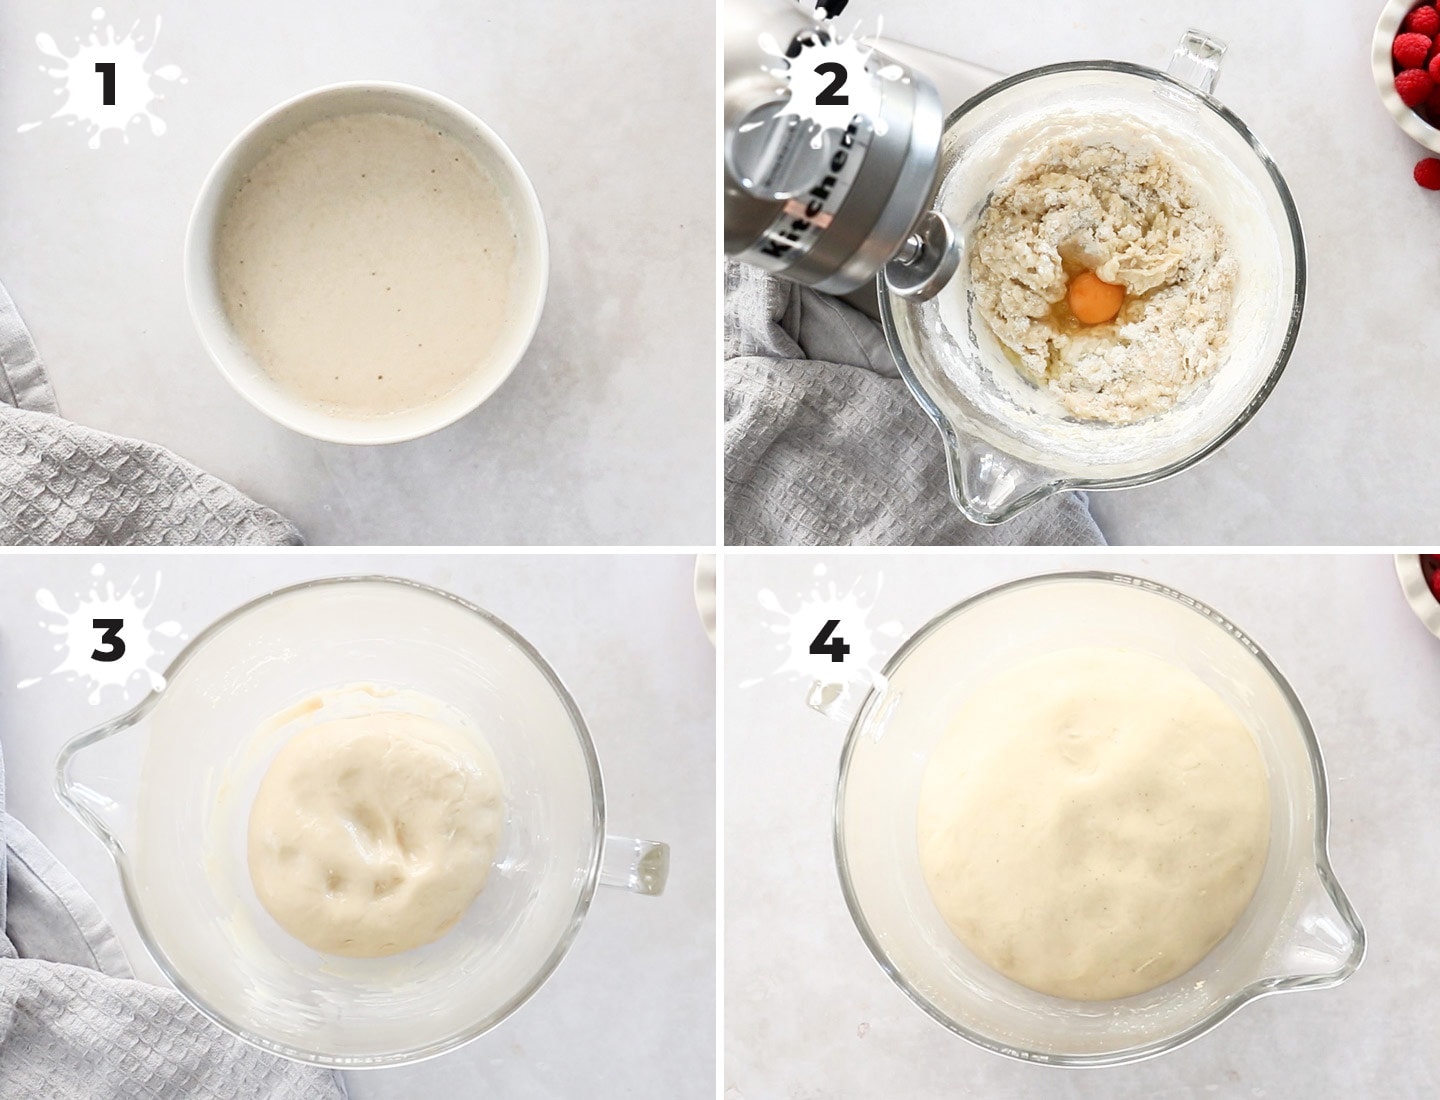 A collage of 4 images showing how to make the dough.